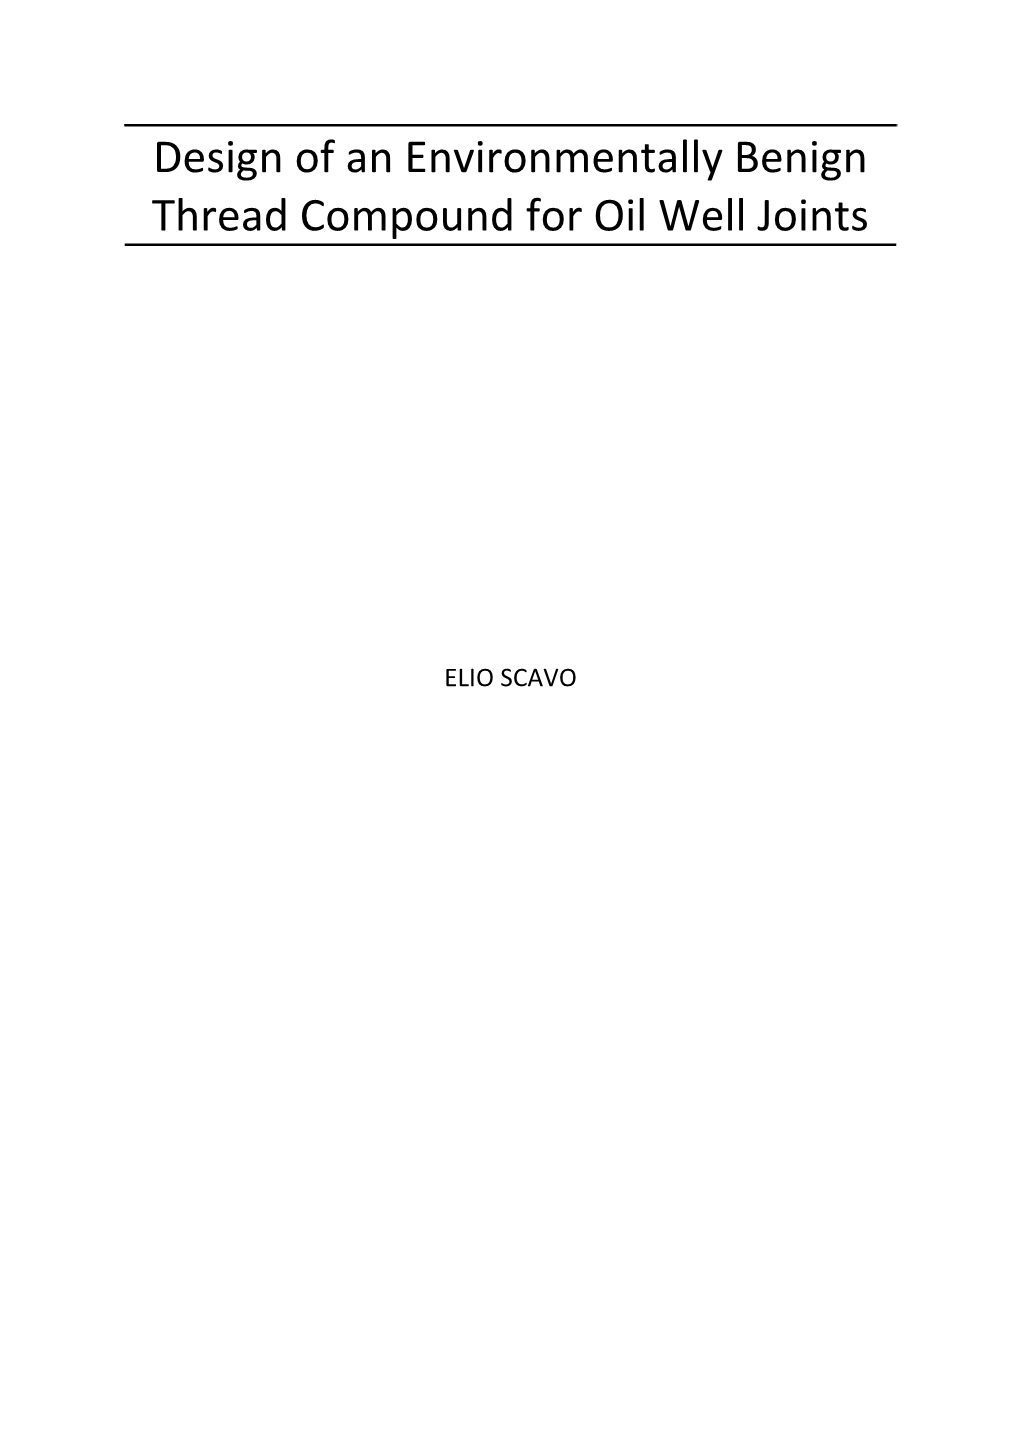 Design of an Environmentally Benign Thread Compound for Oil Well Joints